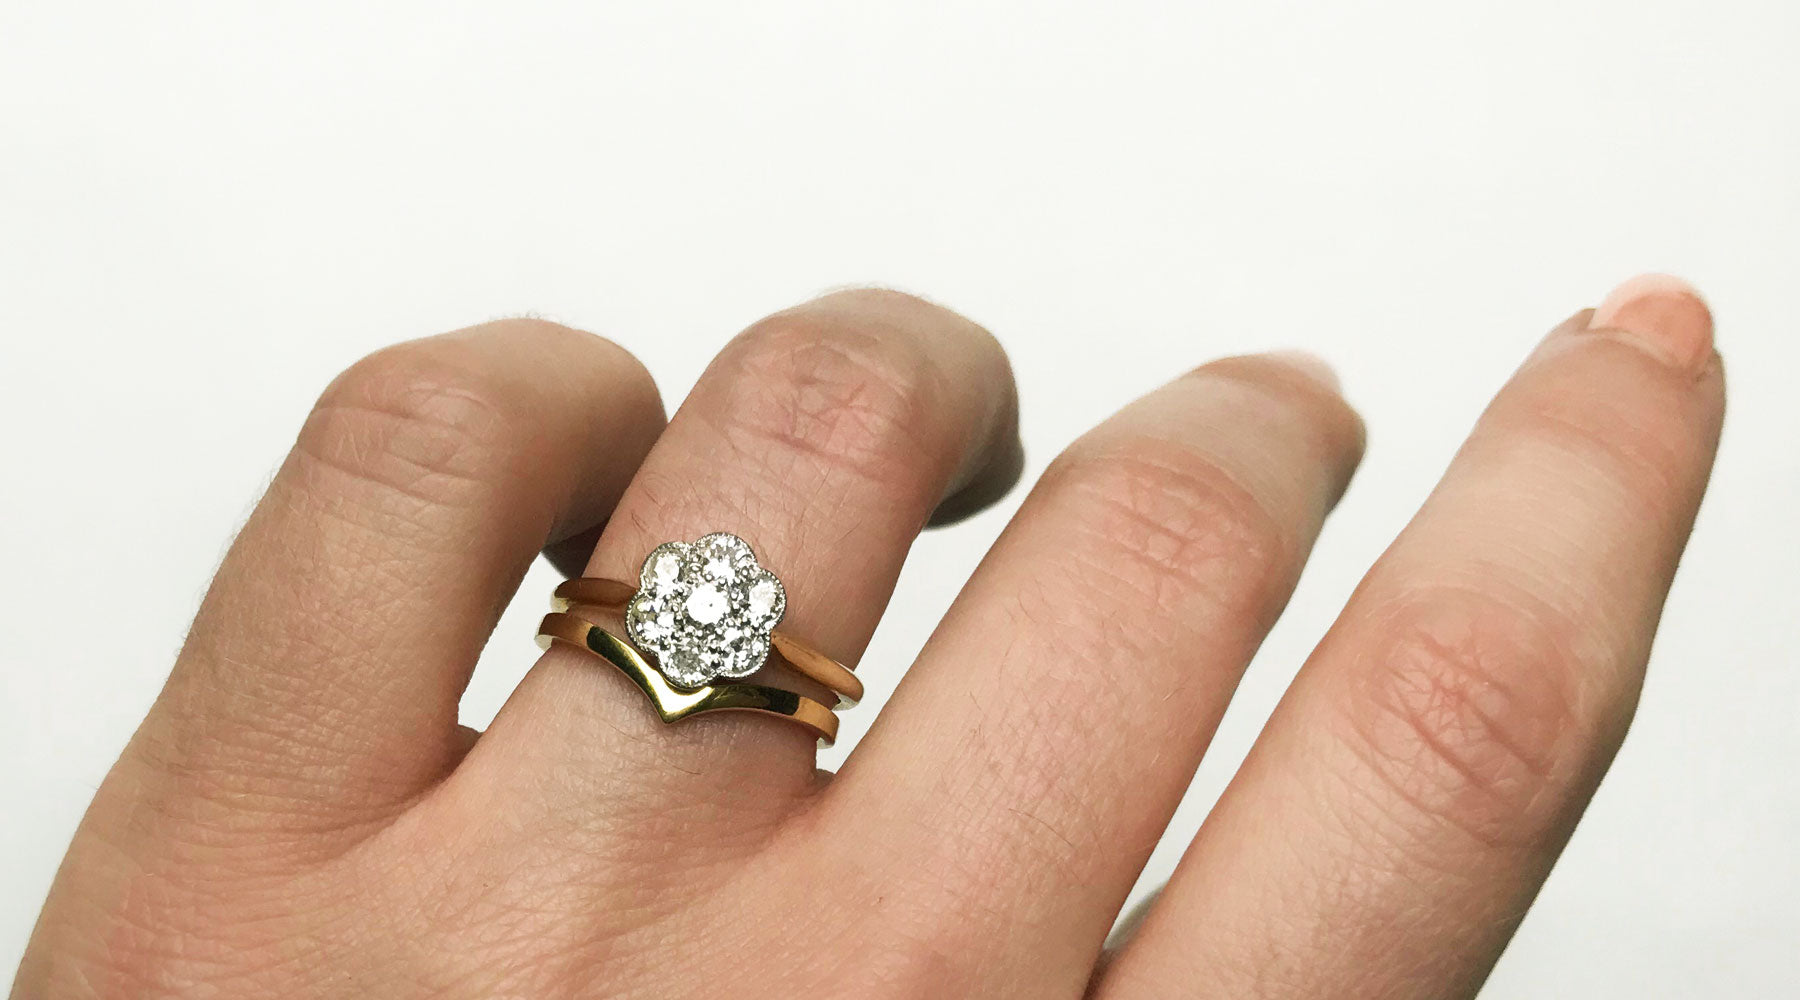 How to find a wedding band to match your vintage